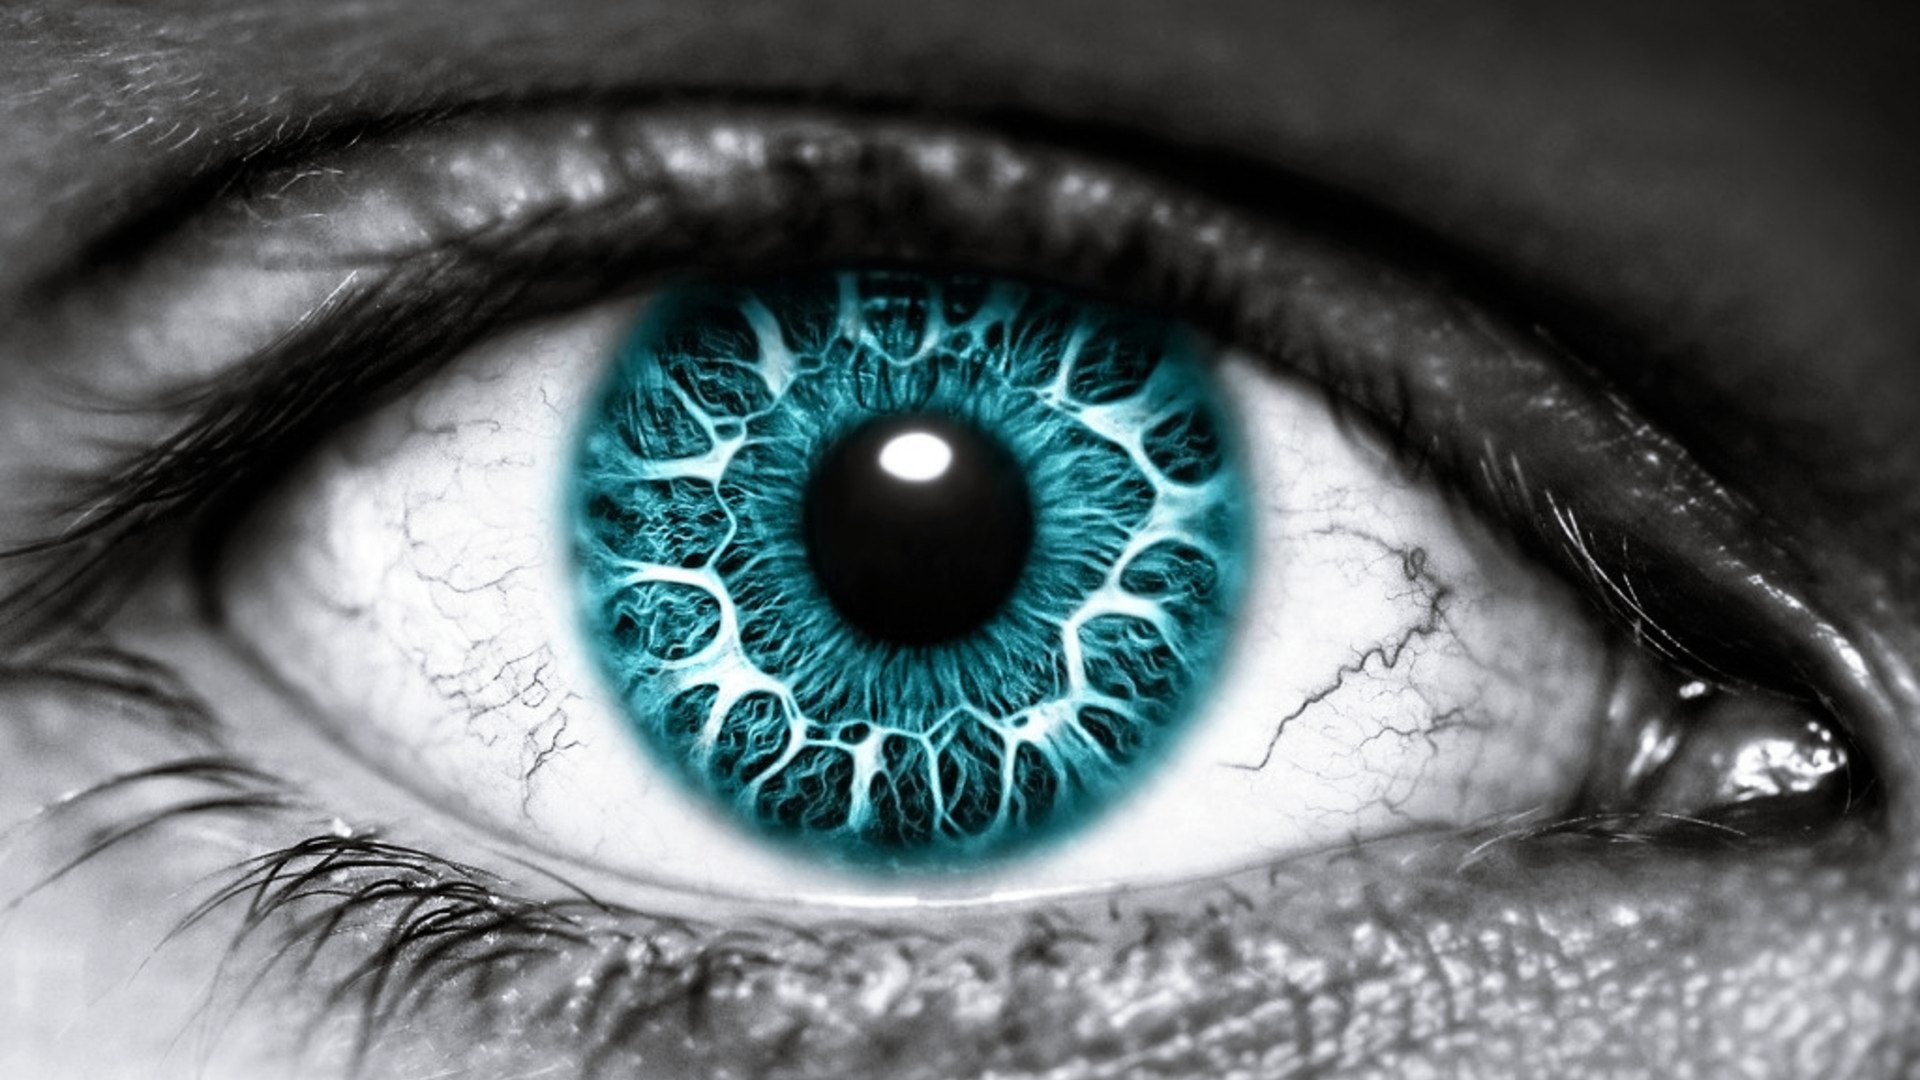 1920x1080 pictures of eyes green eyes pic blue eyes images fantasy eyes